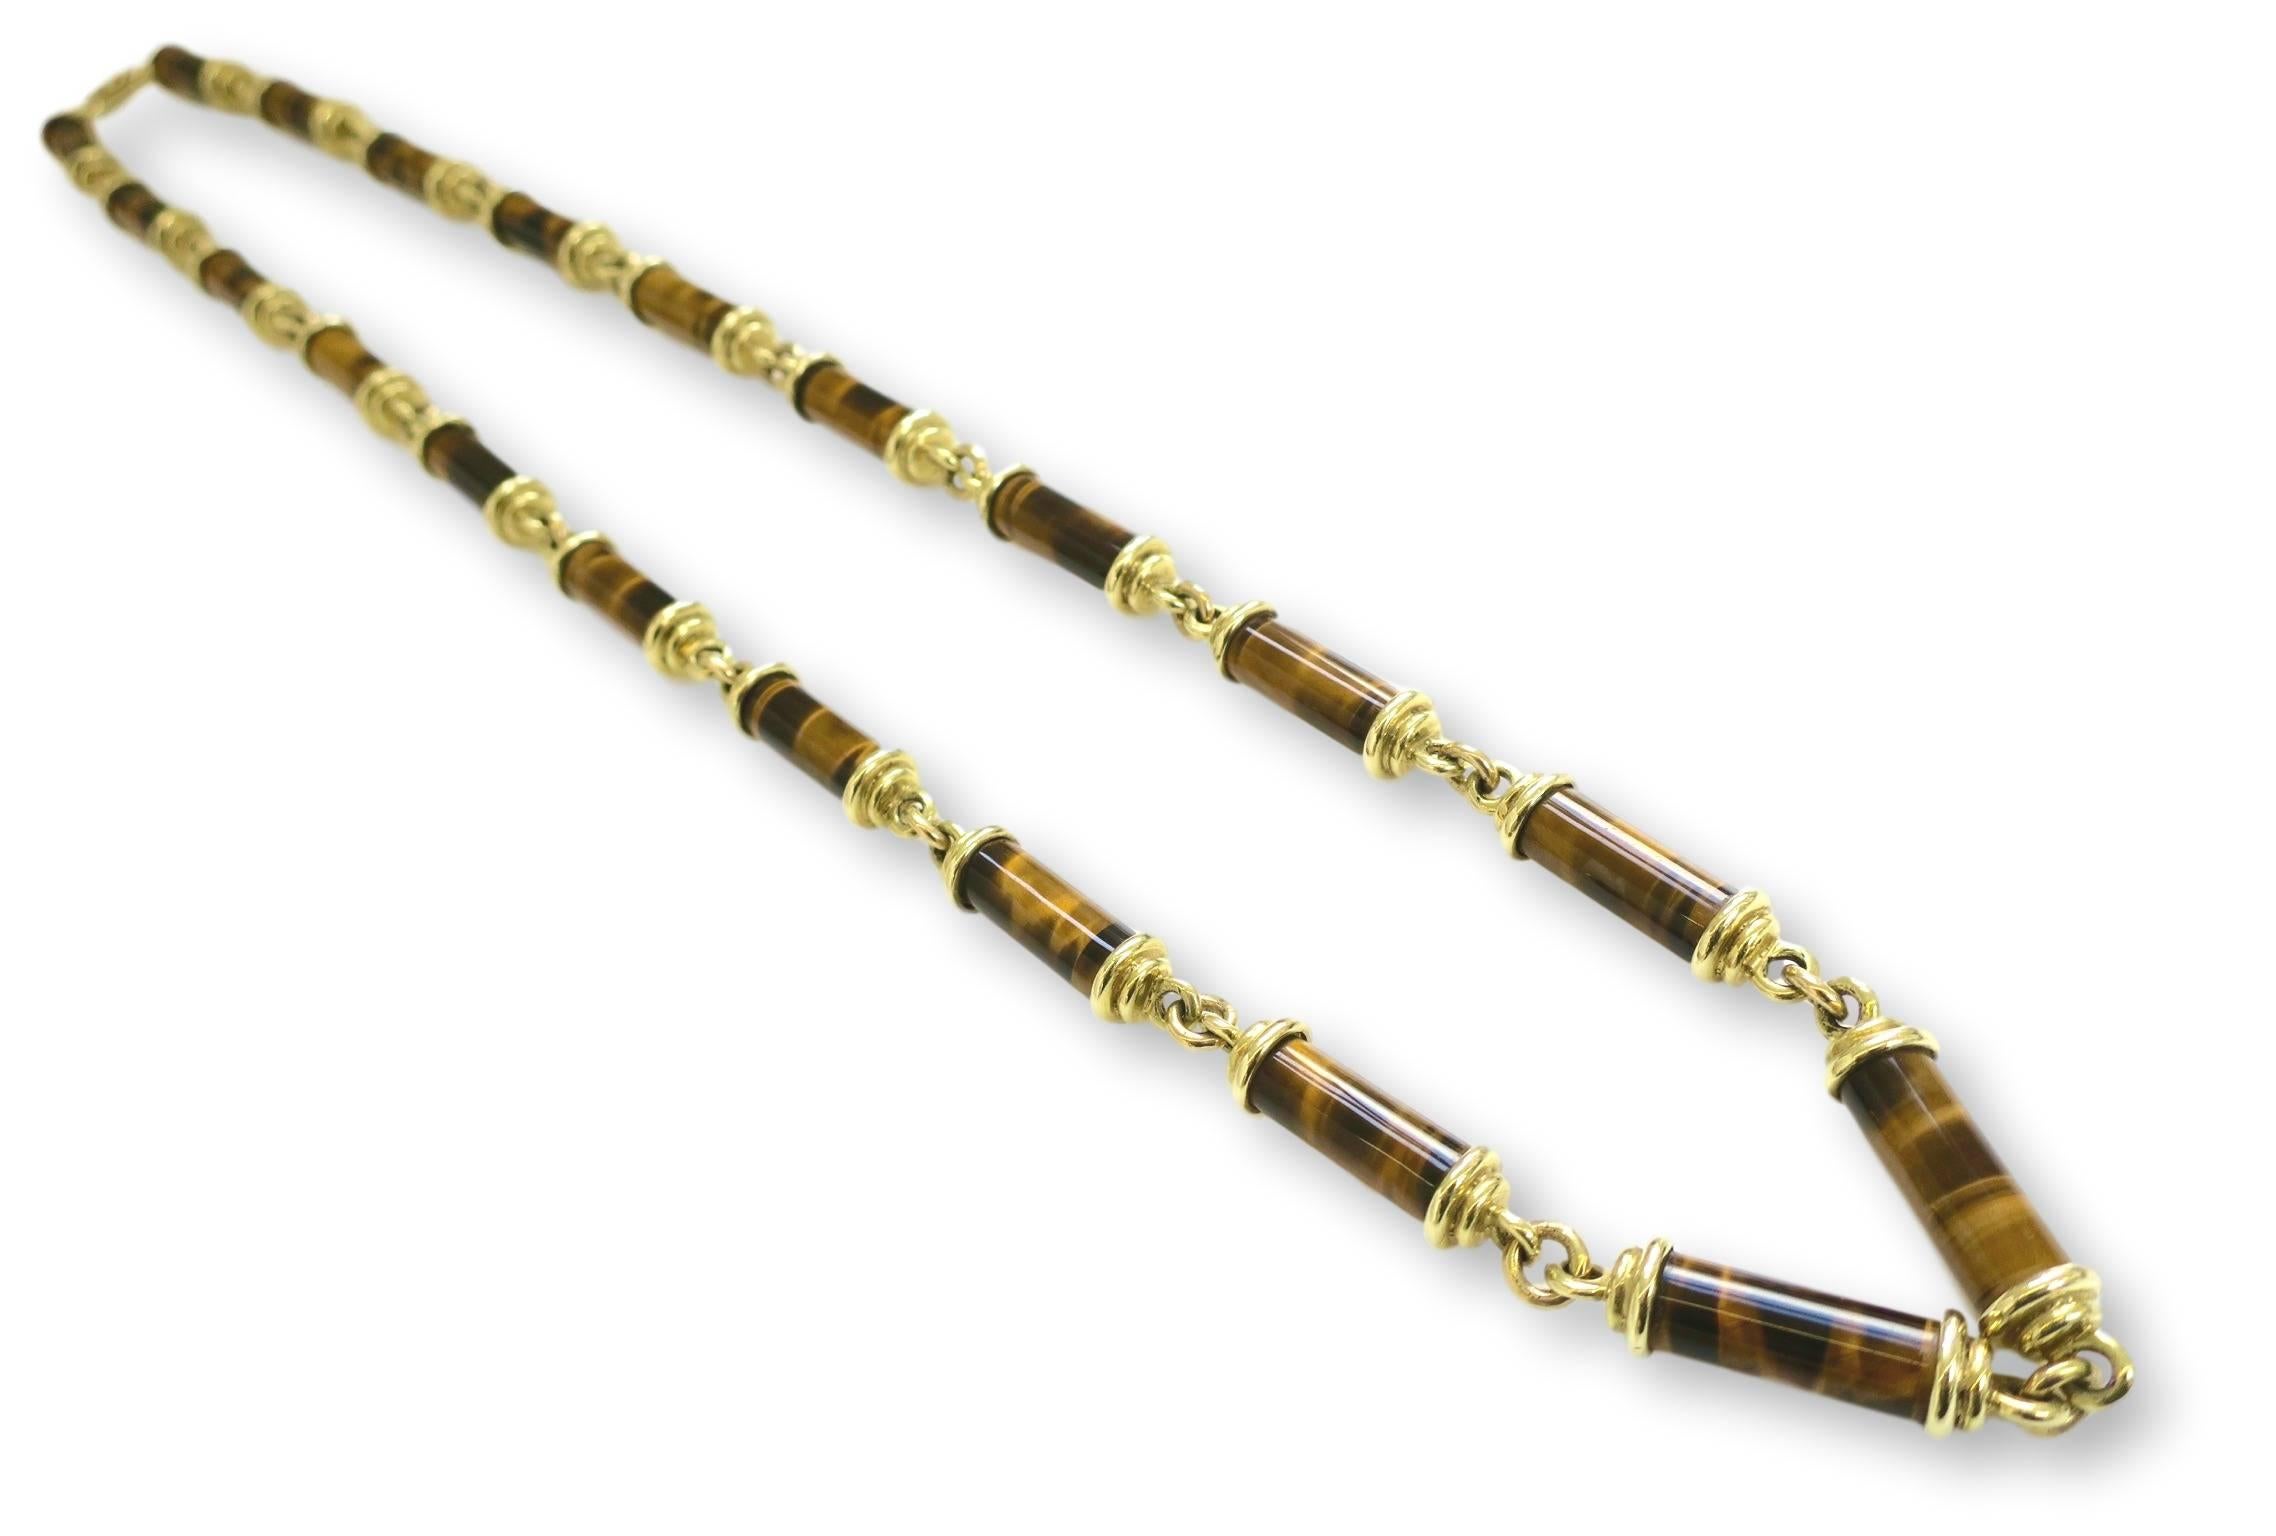 Substantial gold and tigerseye chain necklace. The 27.5" necklace with columnar-shaped polished tigerseye and 14k yellow gold caps and links. 
Its works well on its own but also could easily sport 
a medallion if desired. The warm and lustrous